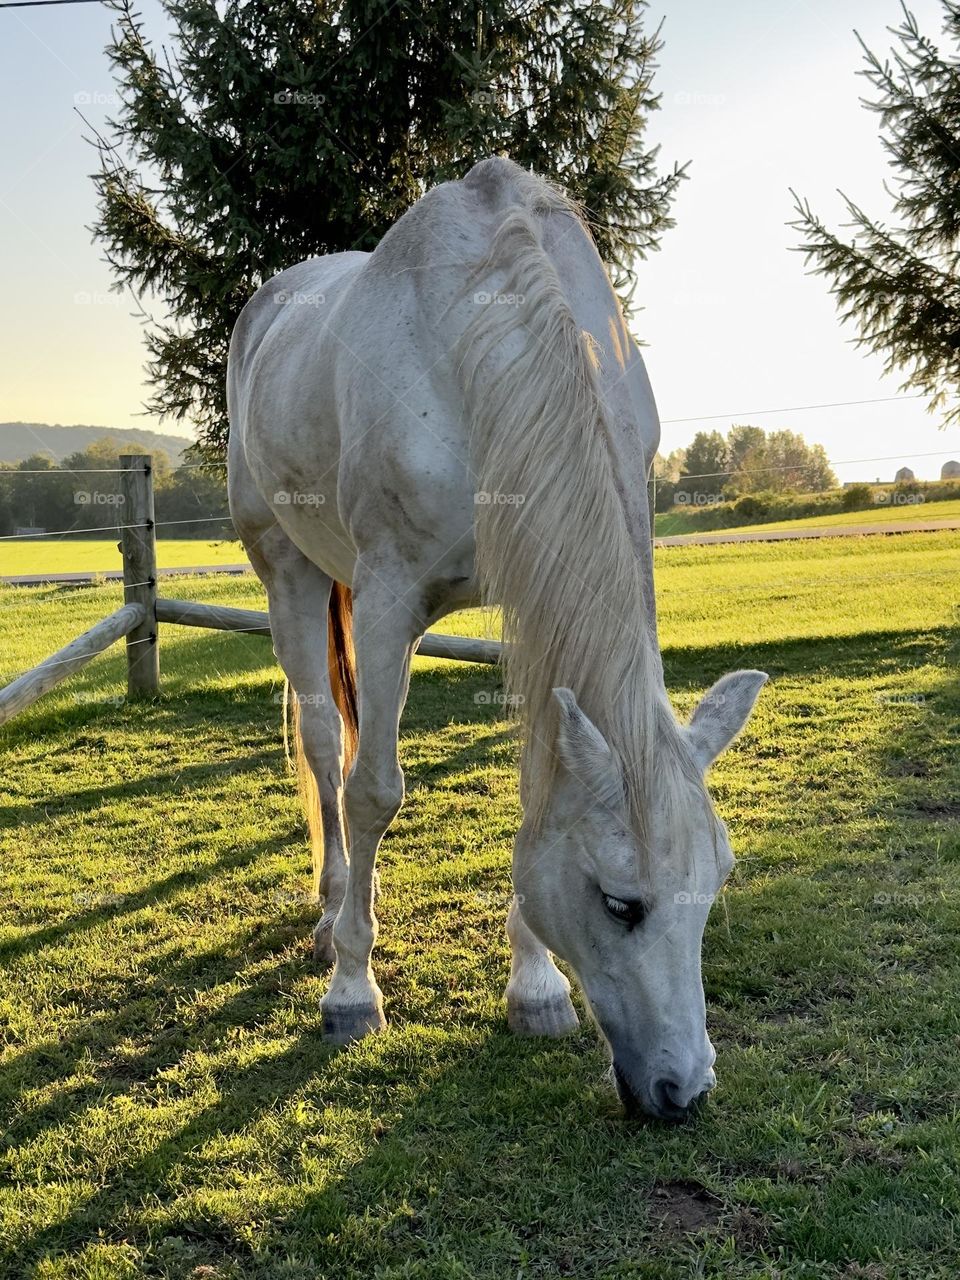 An aging gray Arabian horse grazes as the sun begins its descent and the shadows grow long.